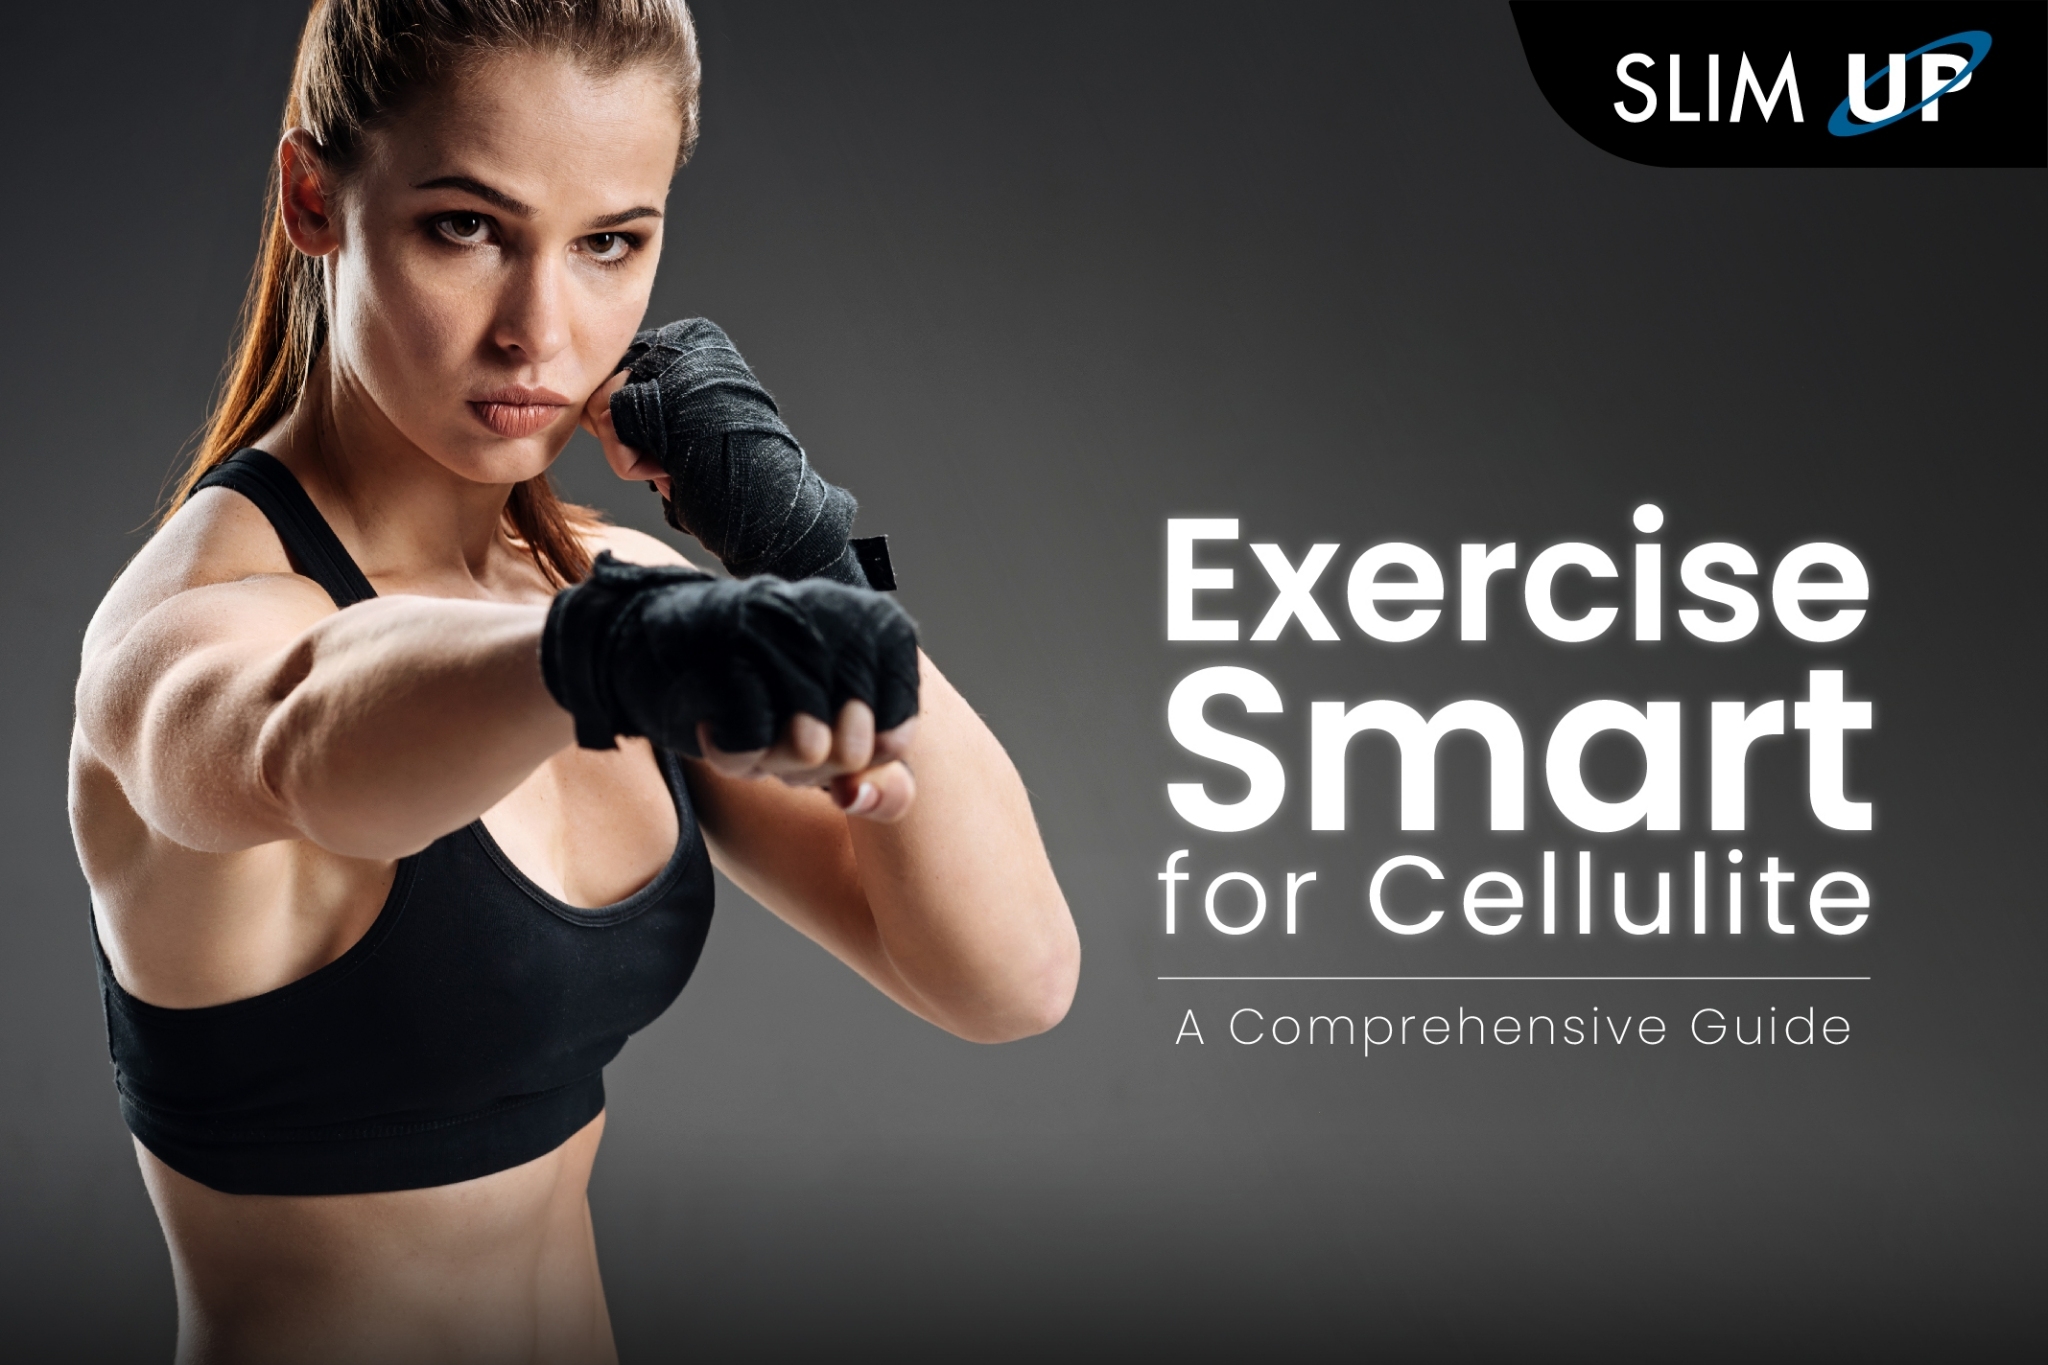 Strategic Exercise Approaches for Tackling Cellulite: An In-Depth Handbook